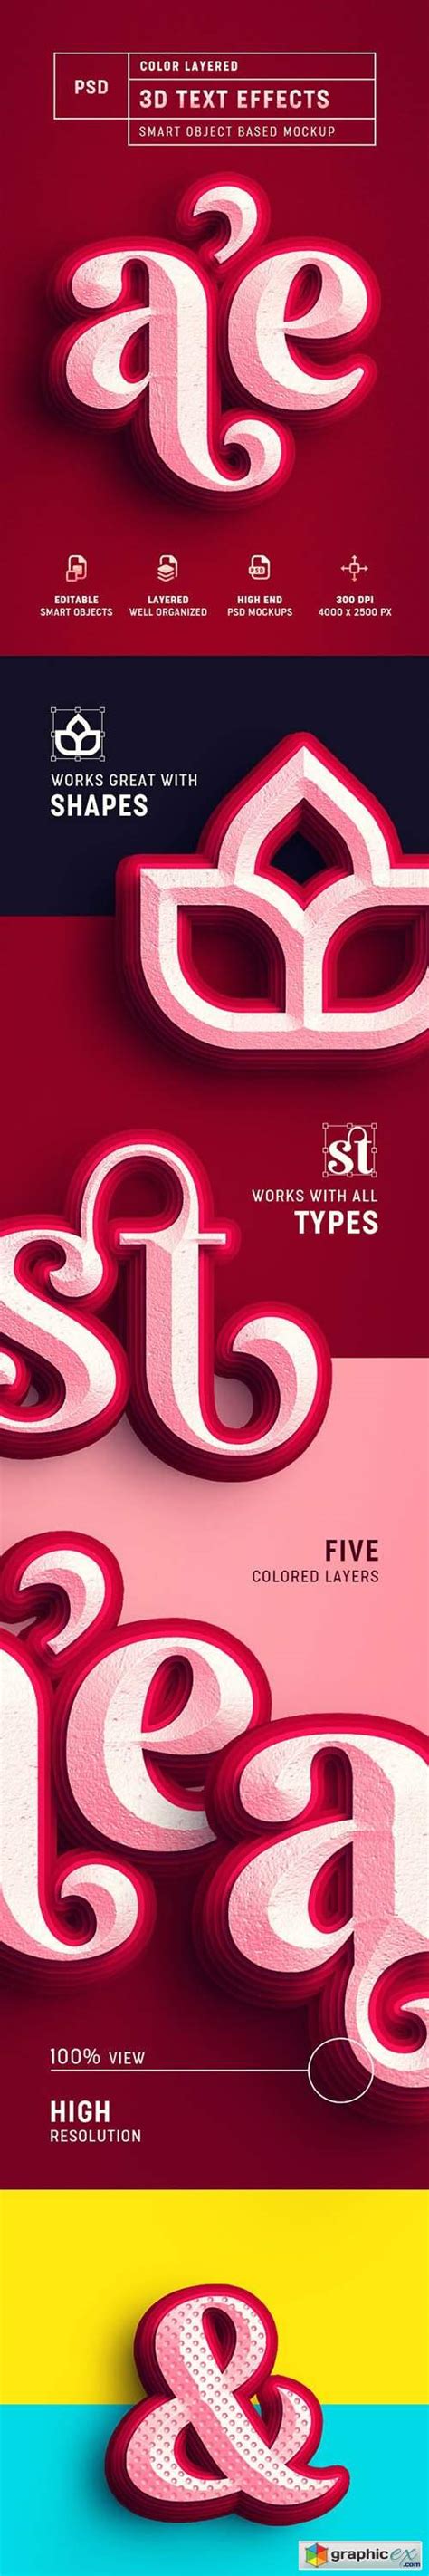 Color Layered 3d Text Effect Mockup Free Download Vector Stock Image